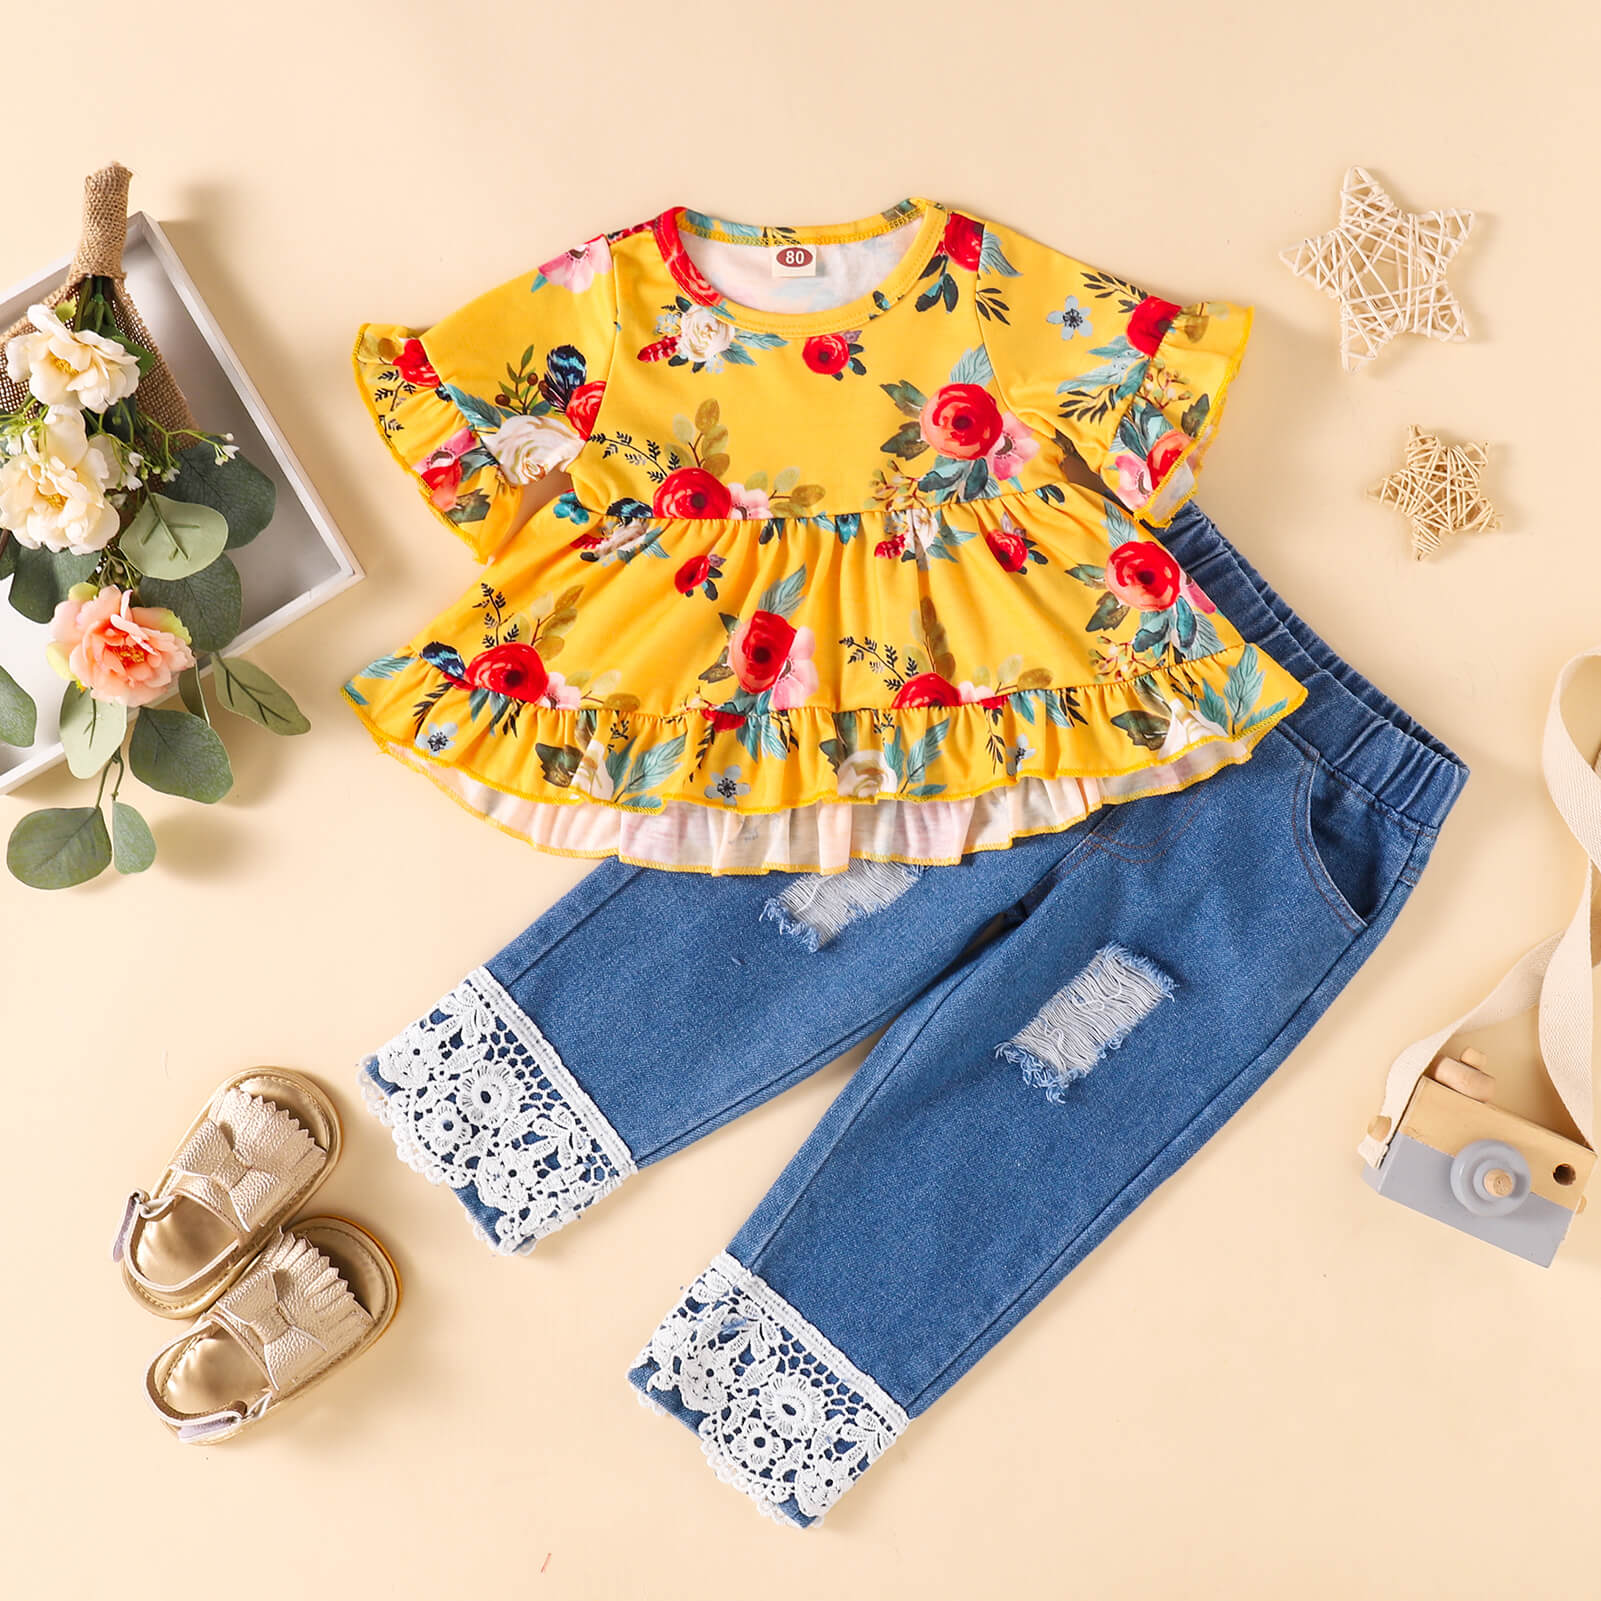 MUSTARD Girls Floral Round Neck Top and Lace Trim Distressed Jeans Set - 3 colors - toddler's pants set at TFC&H Co.